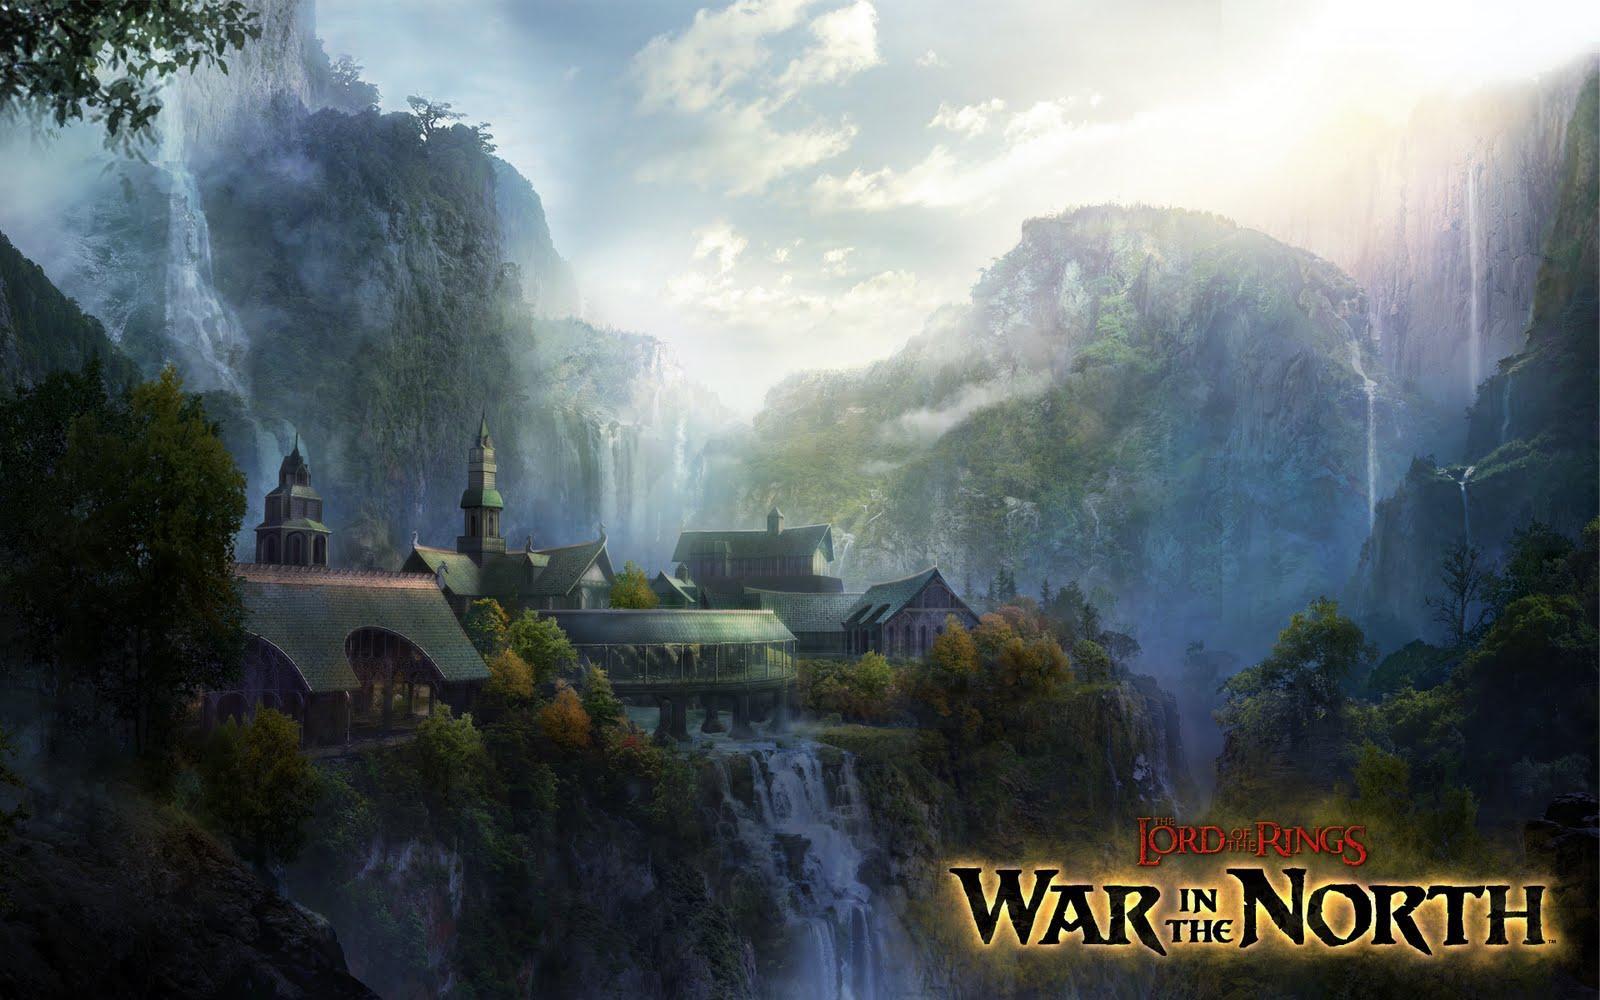 WALLPAPER BOX: The Lord of The Rings in The North Wallpaper